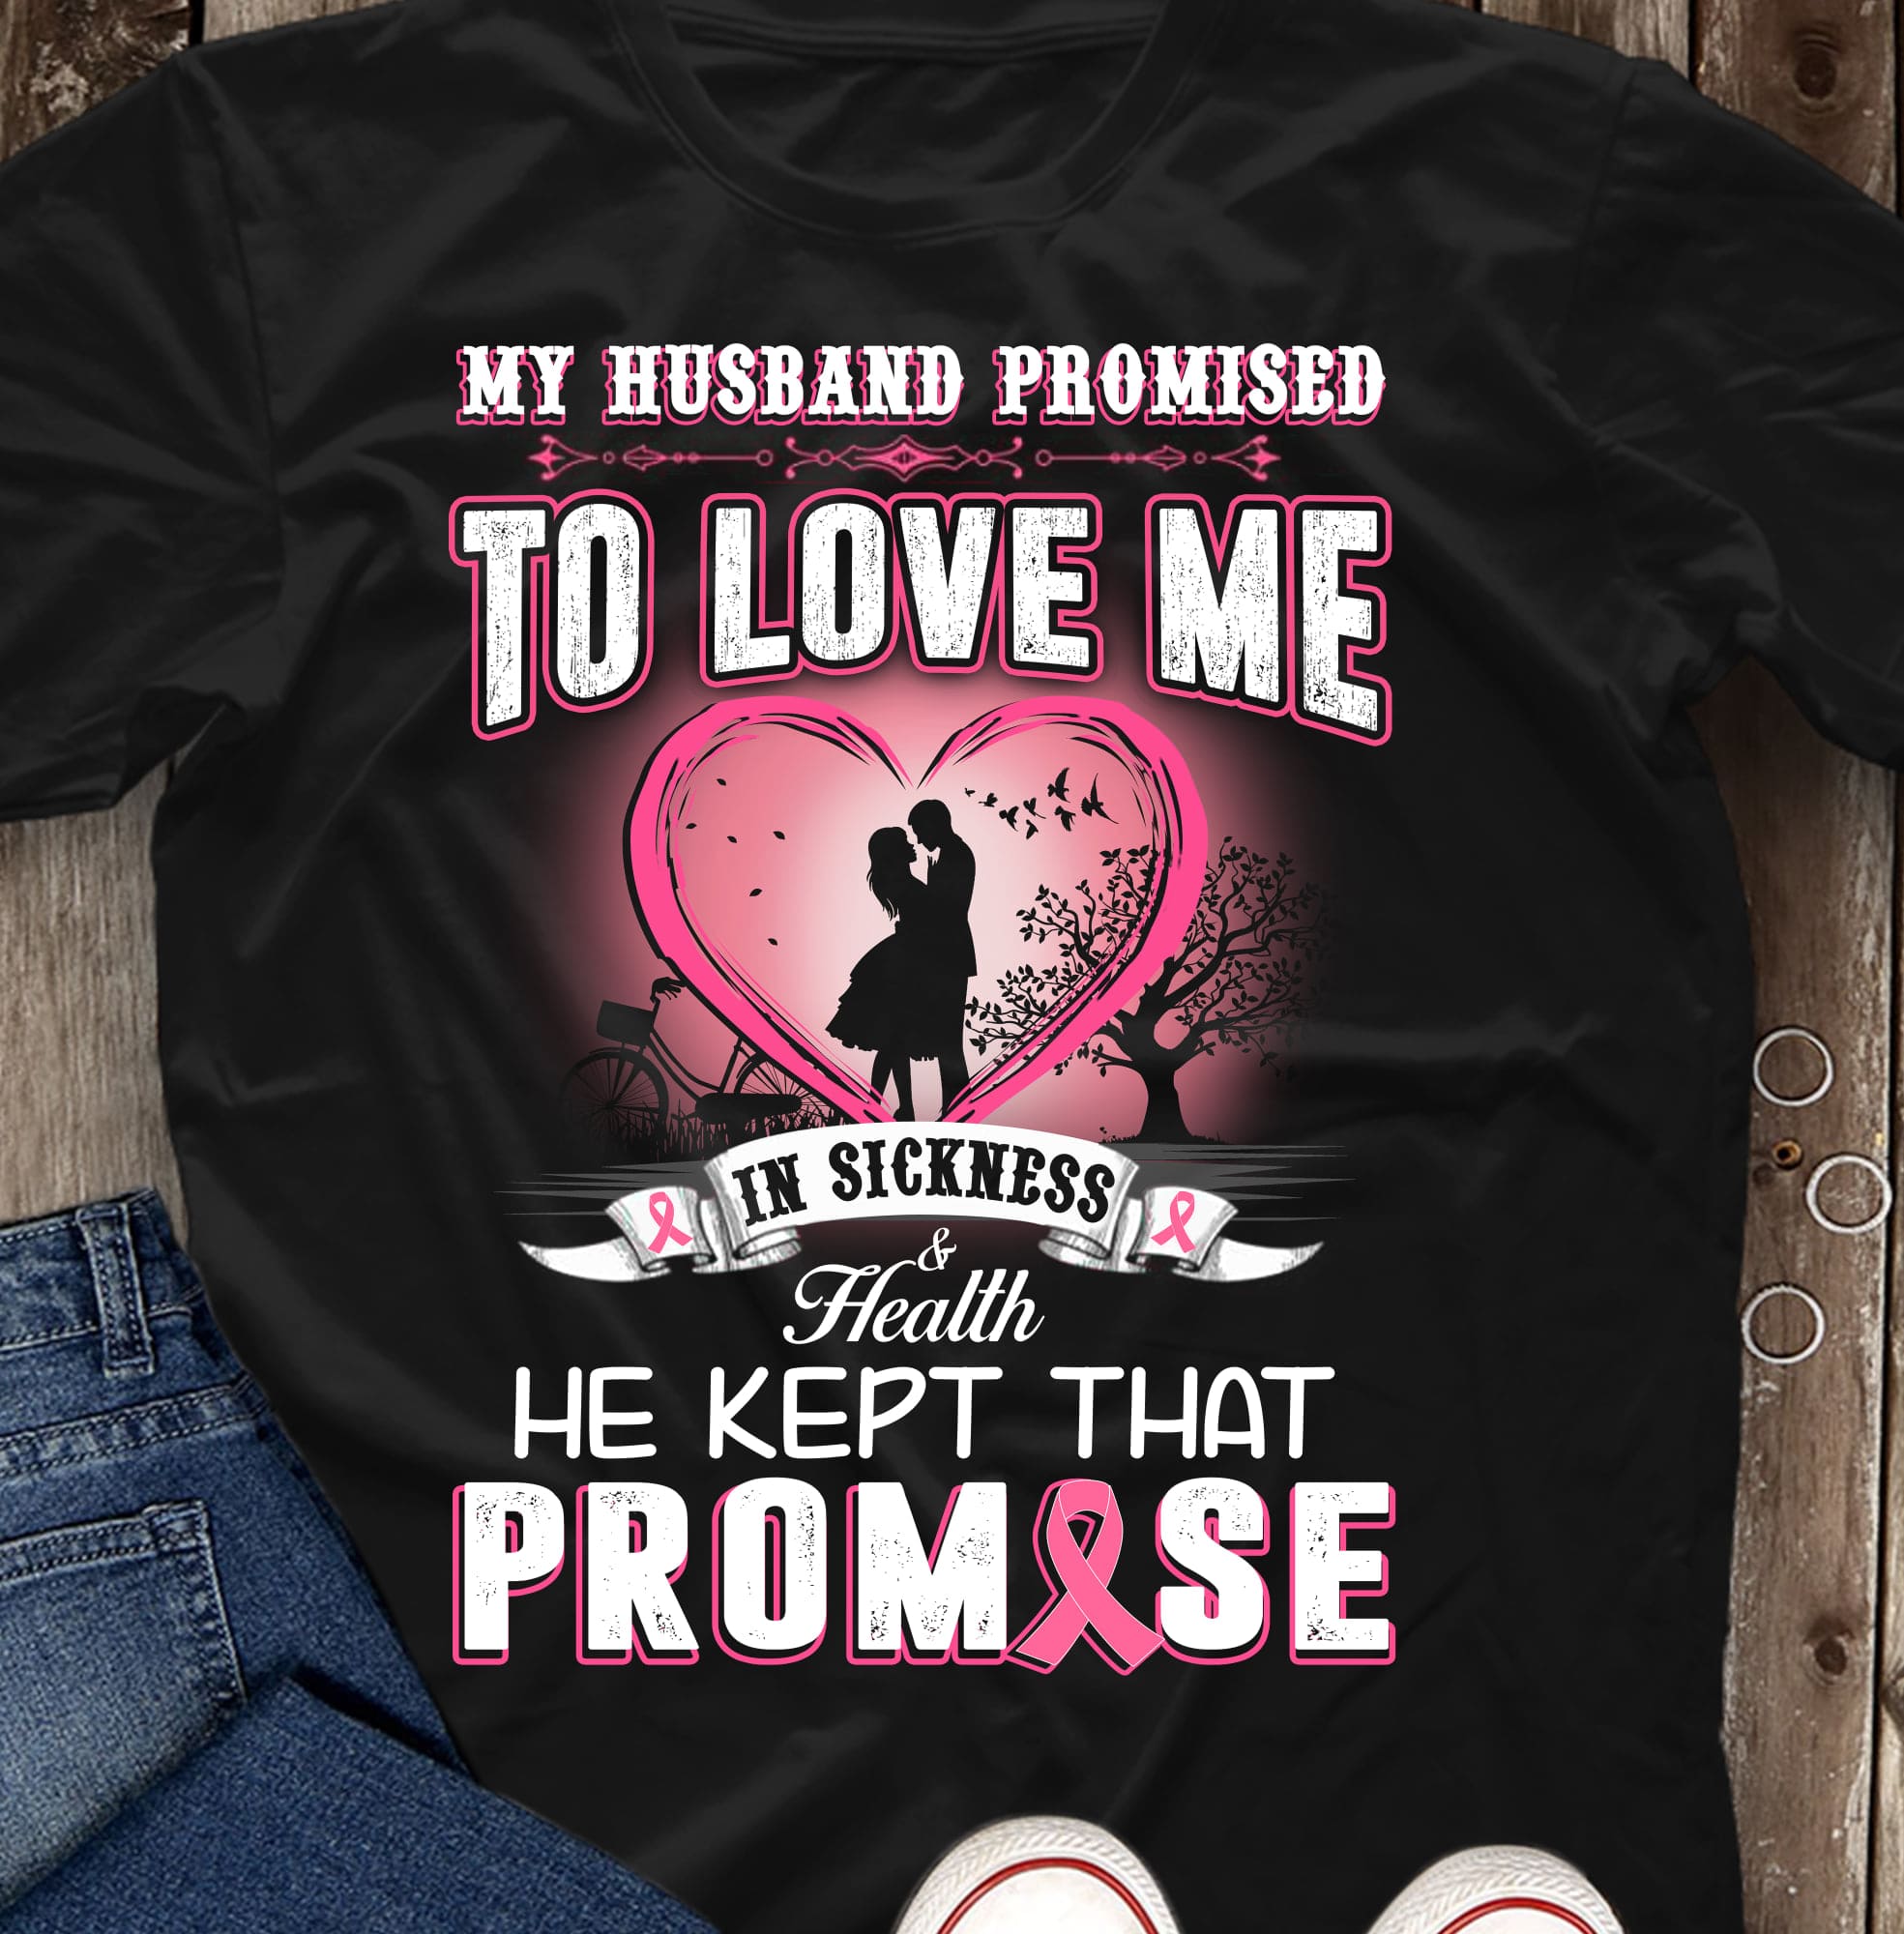 My husband promised to love me in sickness and health - Breast cancer awareness, gift for married couple